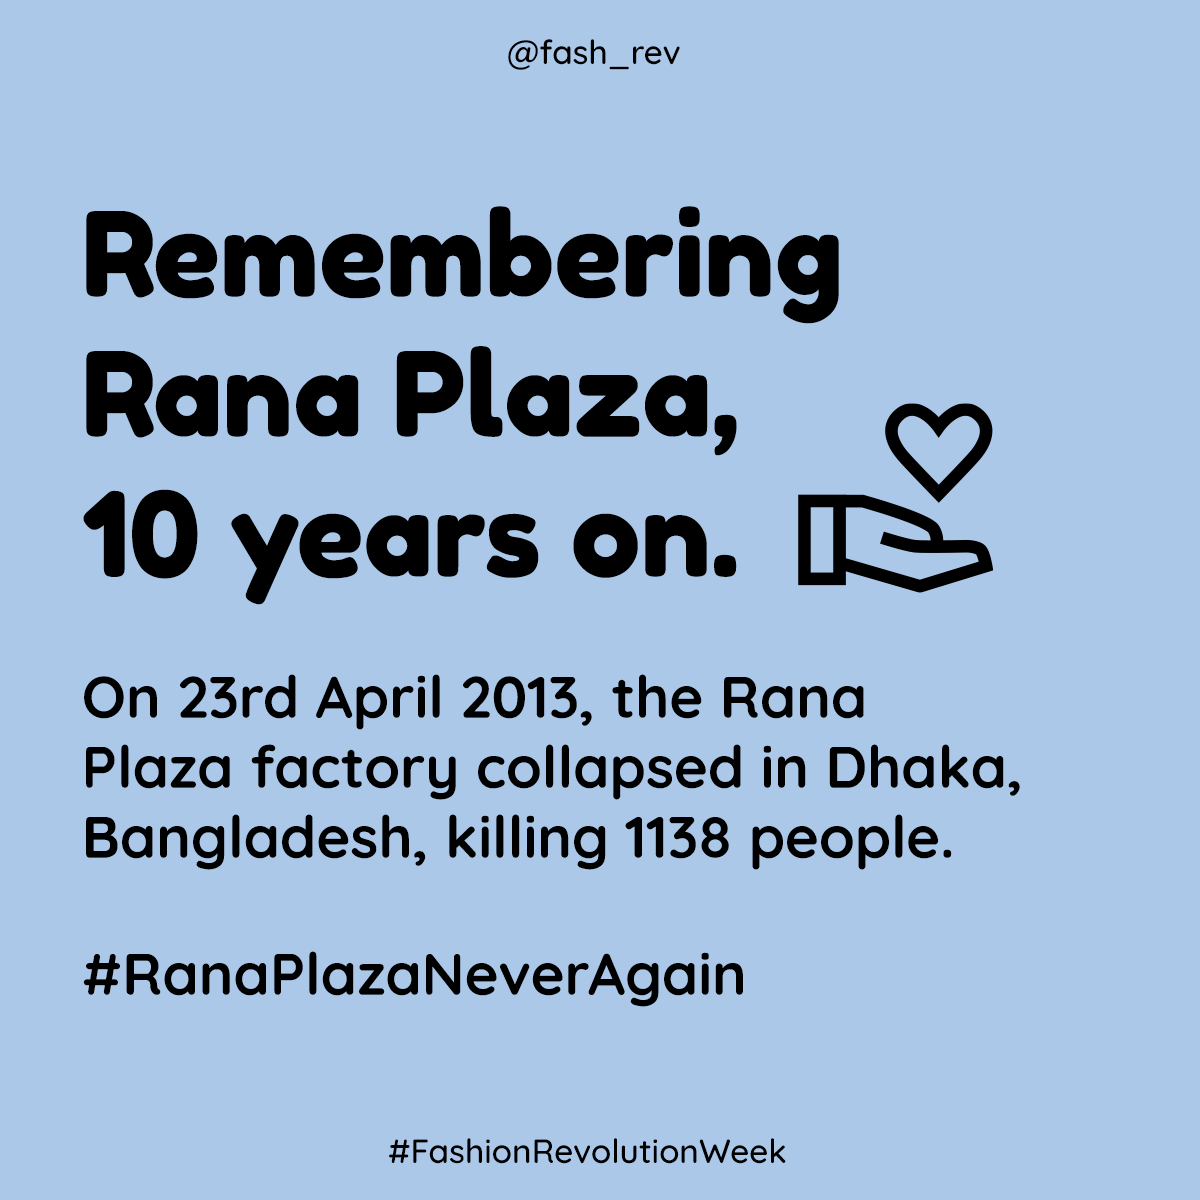 This week is #FashionRevolutionWeek & a decade has passed since the tragedy in Rana Plaza.
The Rana Plaza building in Dhaka, Bangladesh housed a number of garment factories, employing around 5,000 people manufacturing clothing for many of the biggest global fashion brands. 🧵1/3